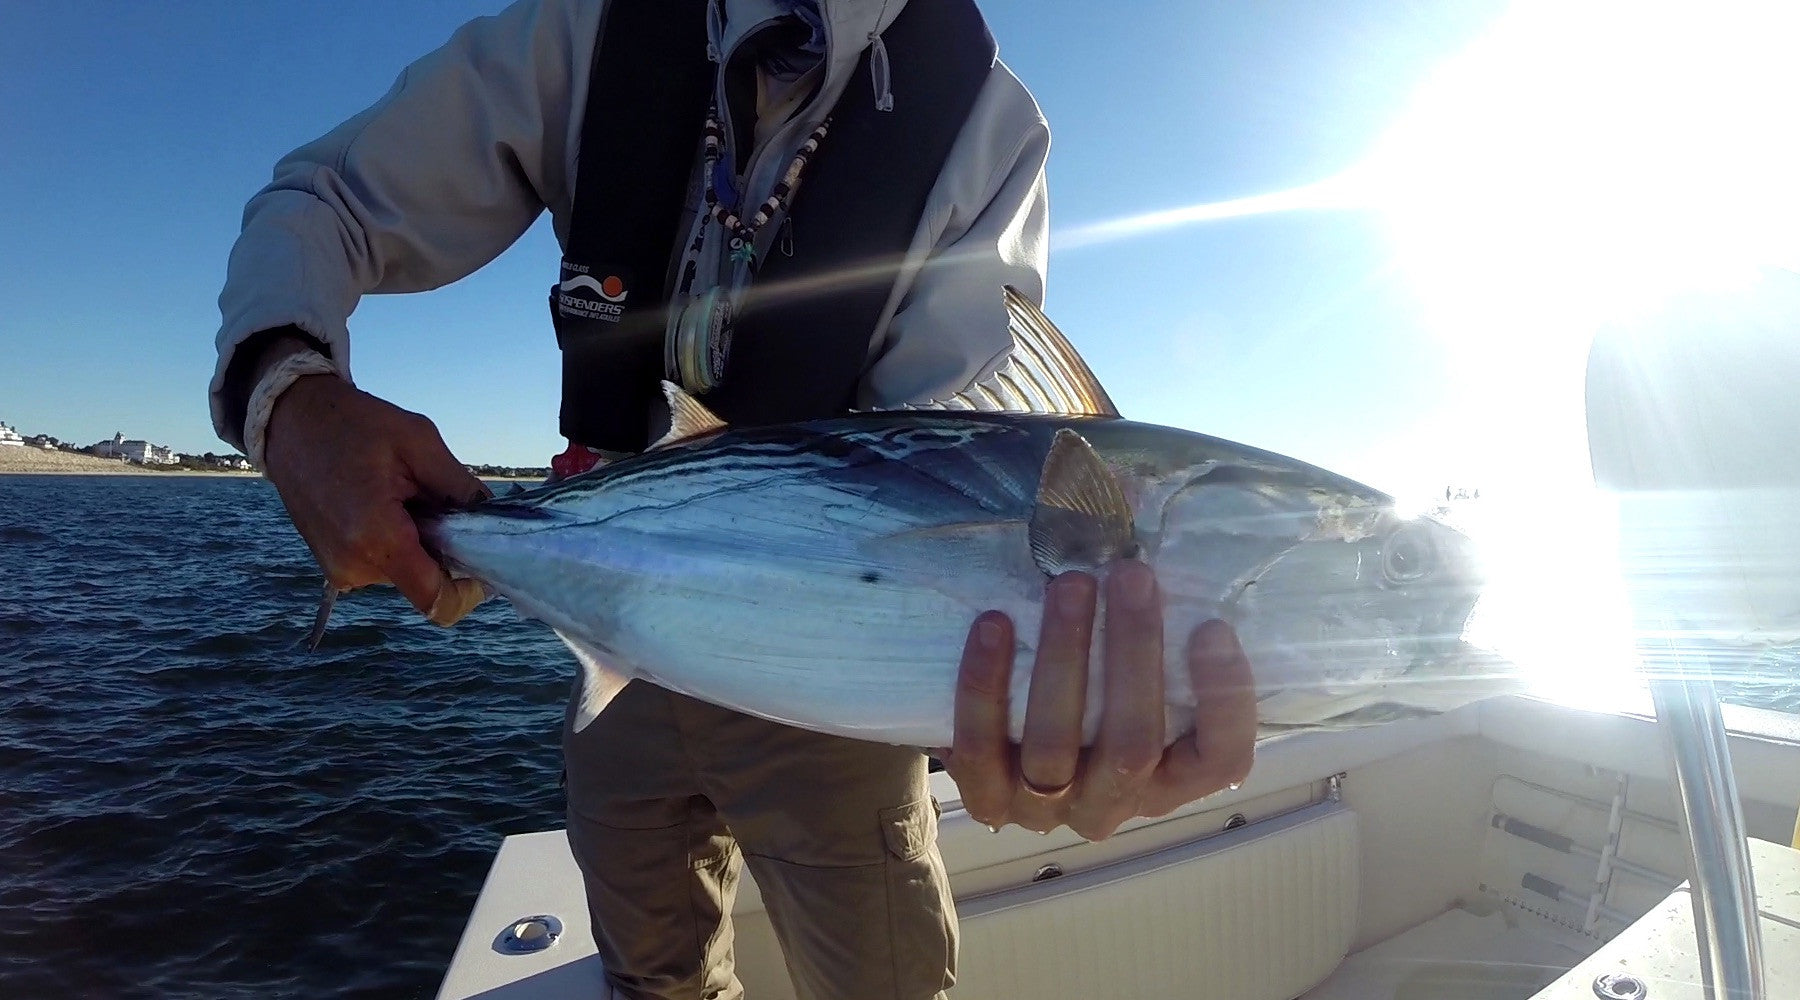 Video: Albies on the Fly off Watch Hill, RI